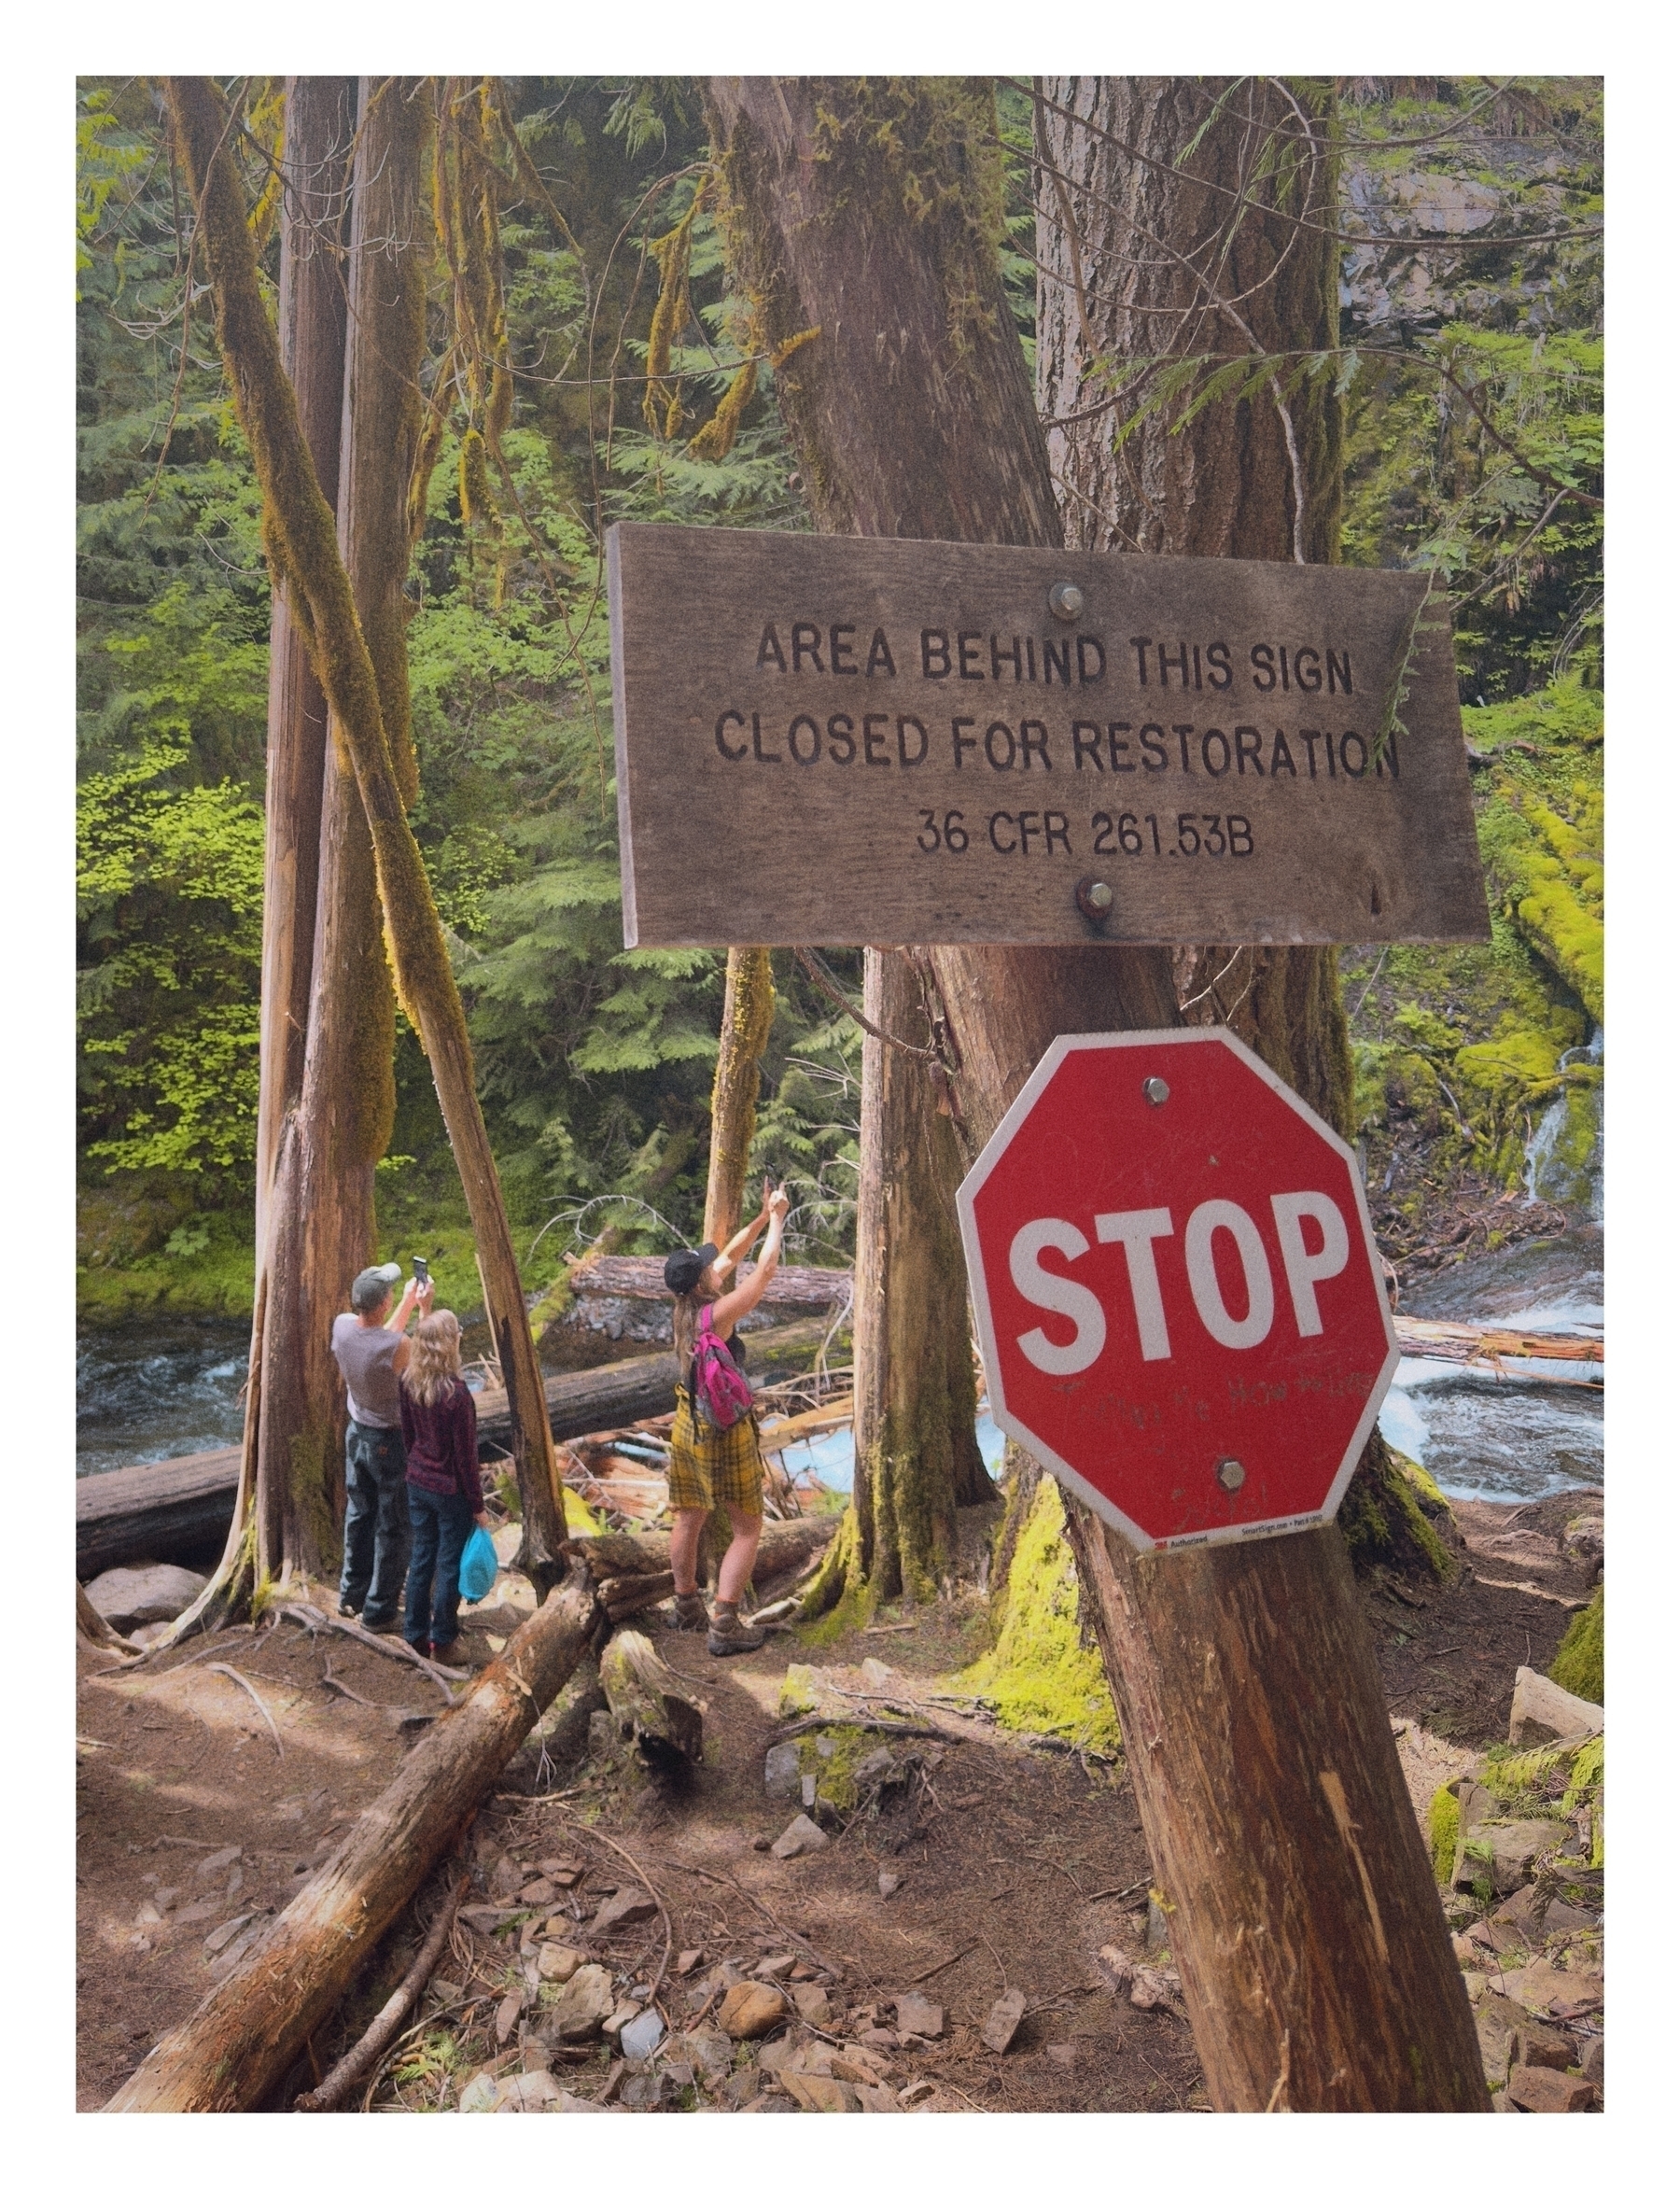 Three children look into a forested area with a river, near signs indicating restoration work and prohibiting entry. Text on signs: “AREA BEHIND THIS SIGN CLOSED FOR RESTORATION 36 CFR 261.53B” and “STOP”.